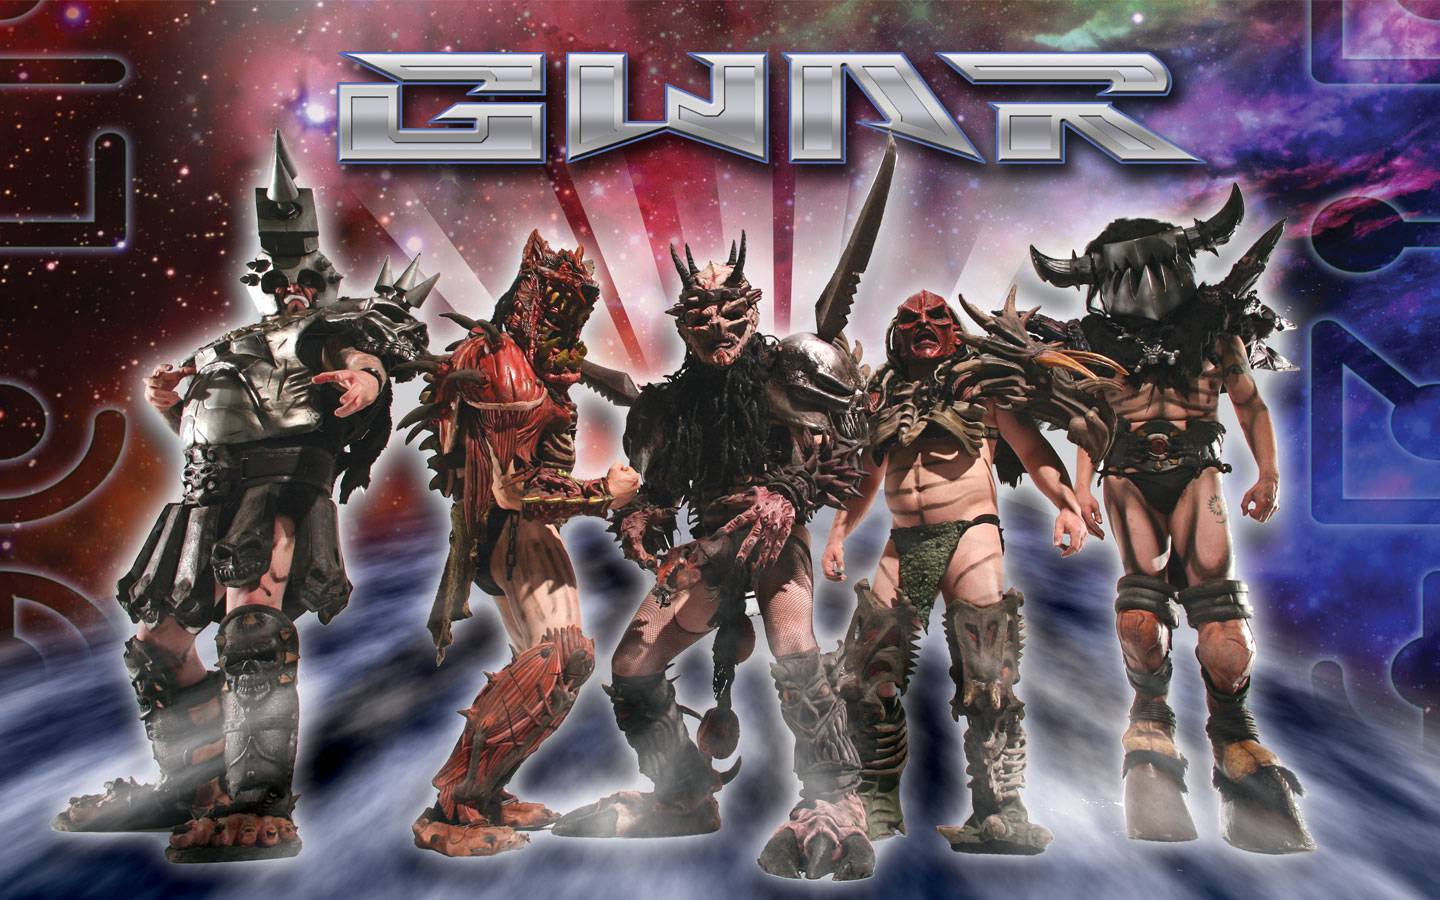 Run and hide, GWAR is coming